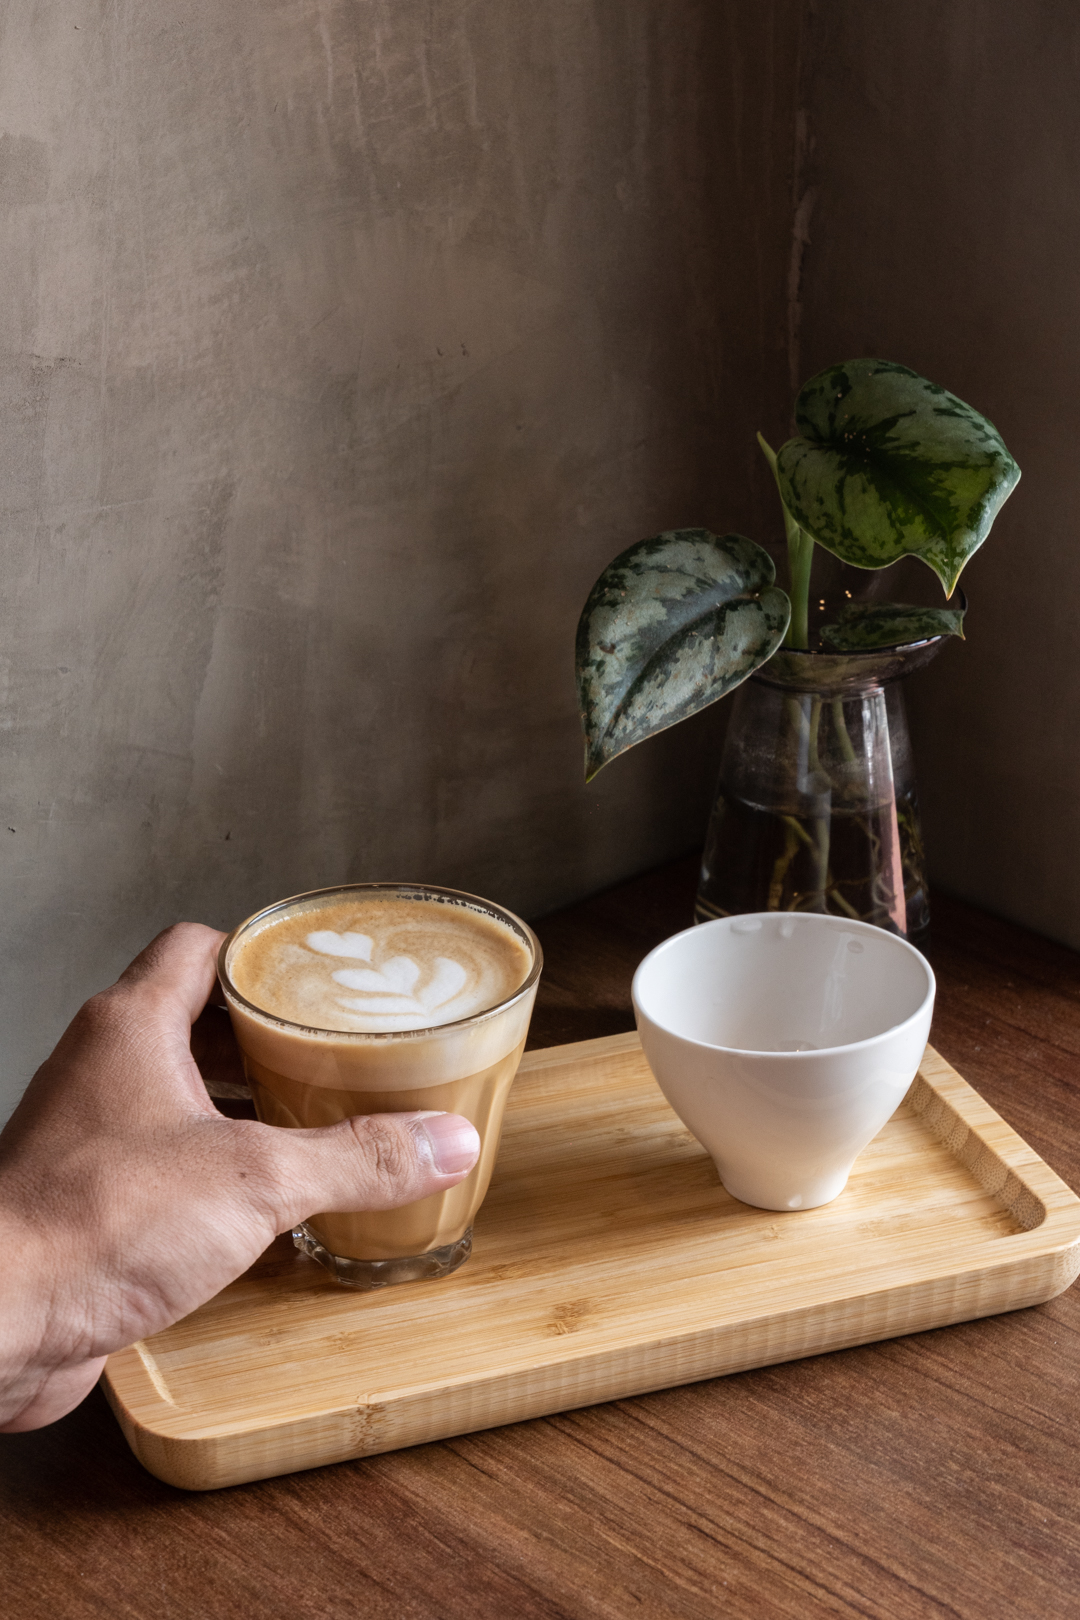 Good things come in pairs, like this "duet" cortado concoction